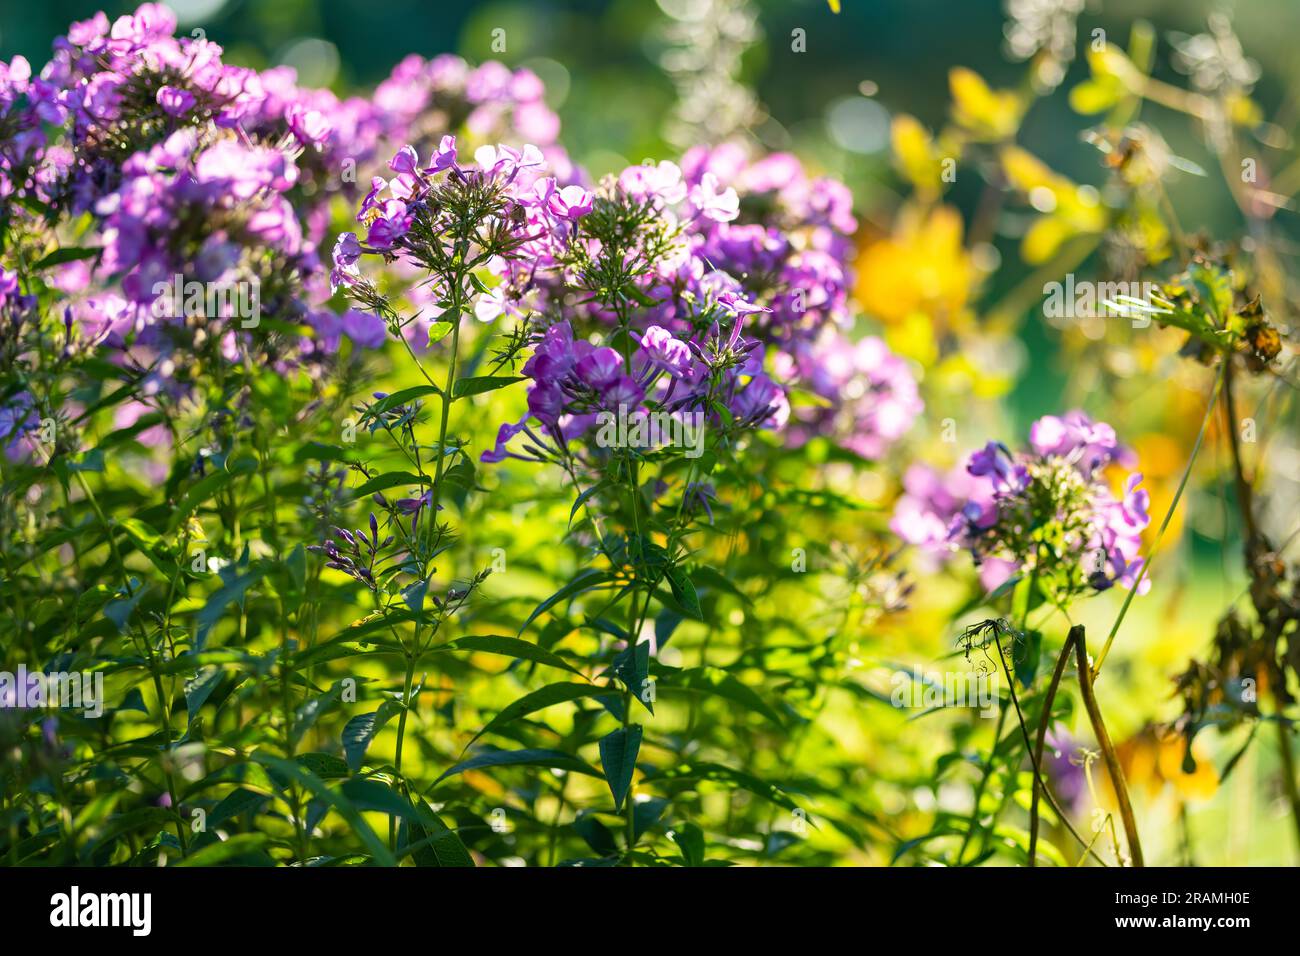 Beautiful purple flame flowers of phlox (Phlox paniculata) blossoming in a garden on autumn day. Beauty in nature. Stock Photo